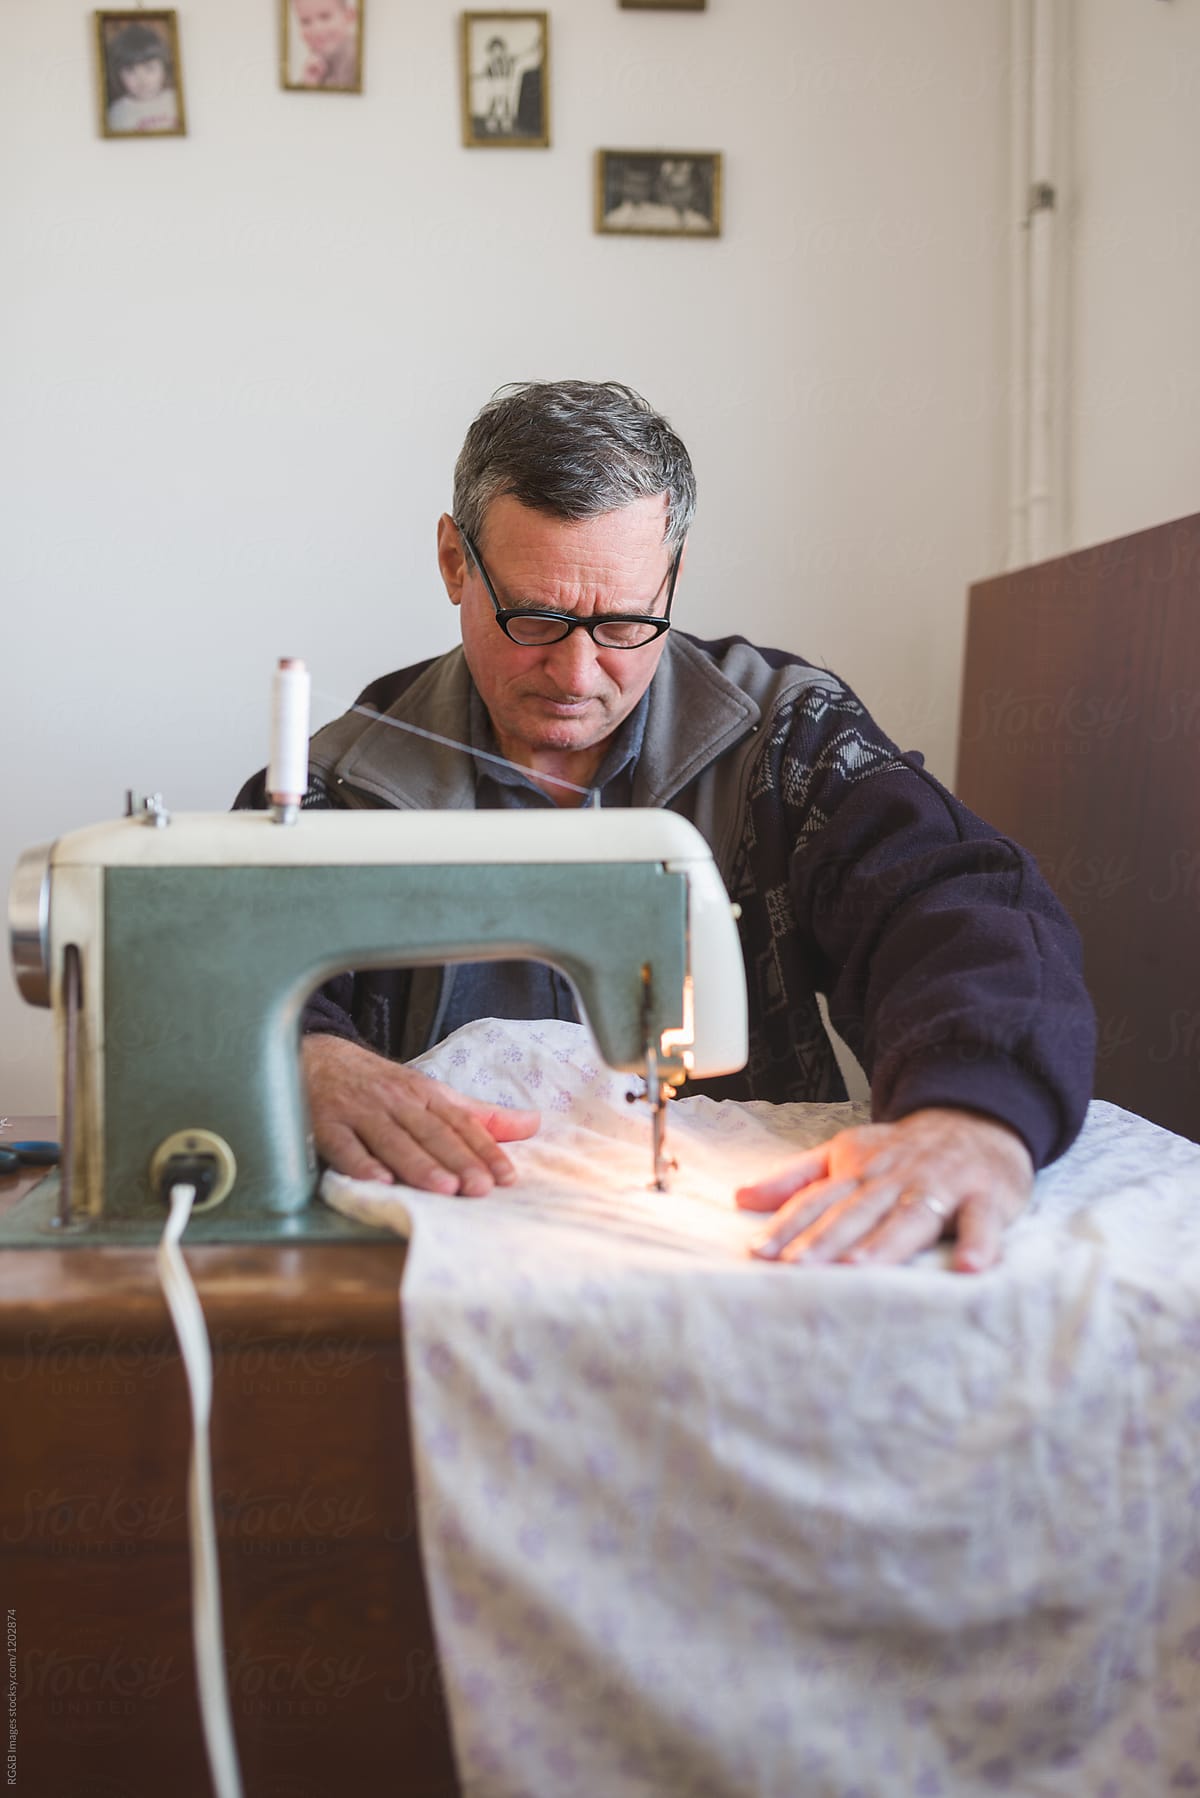 Male around 60s tailoring a piece of fabric indoor